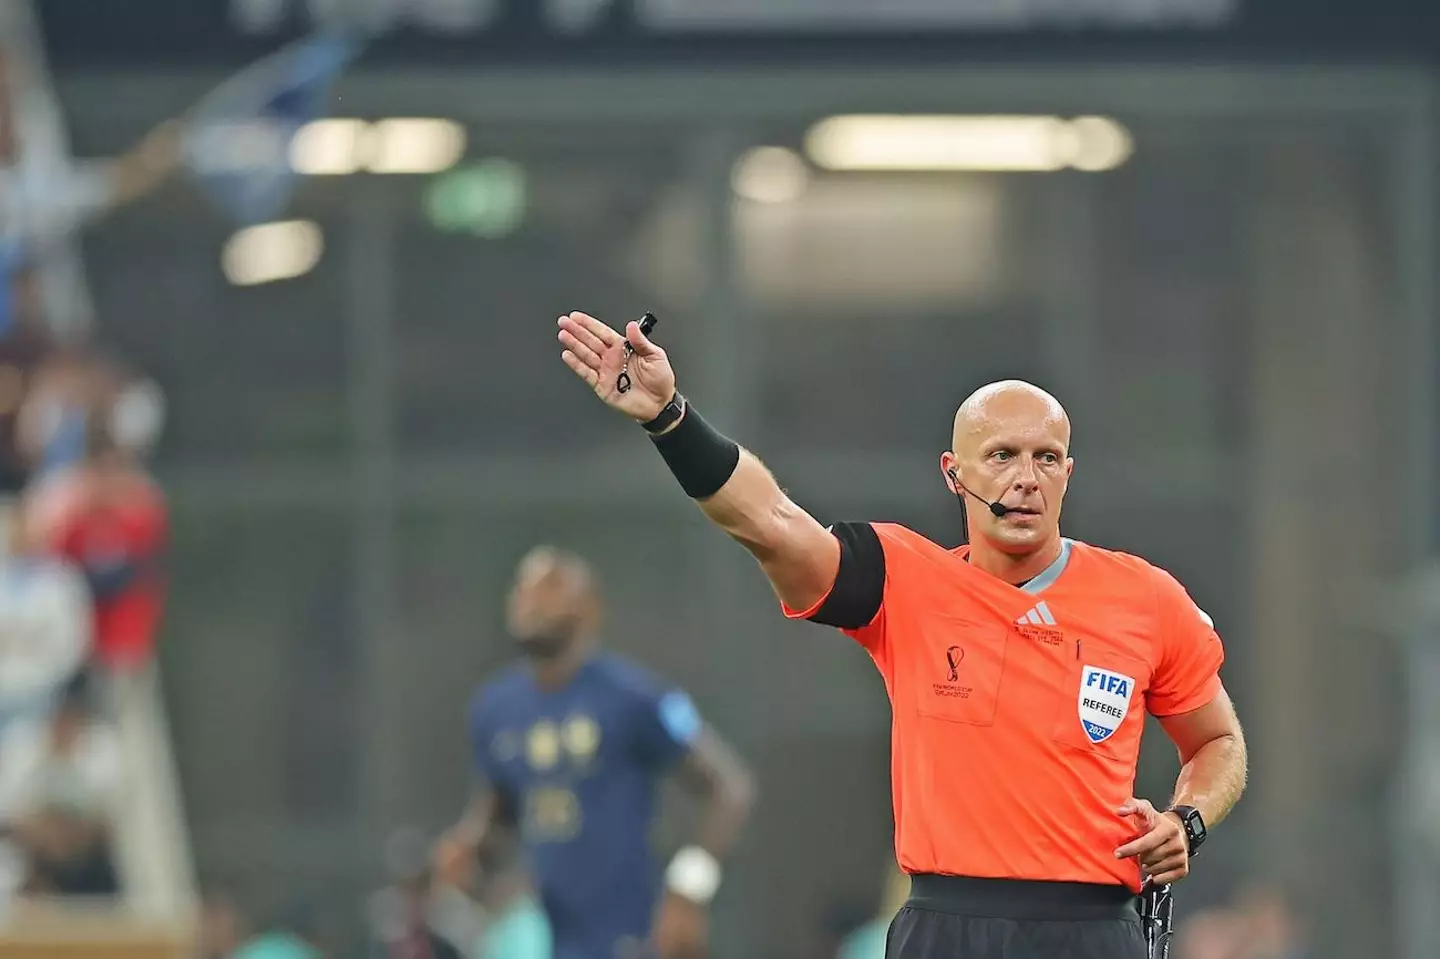 World Cup final referee Szymon Marciniak has hit back at claims that the last goal for Argentina shouldn’t have stood.